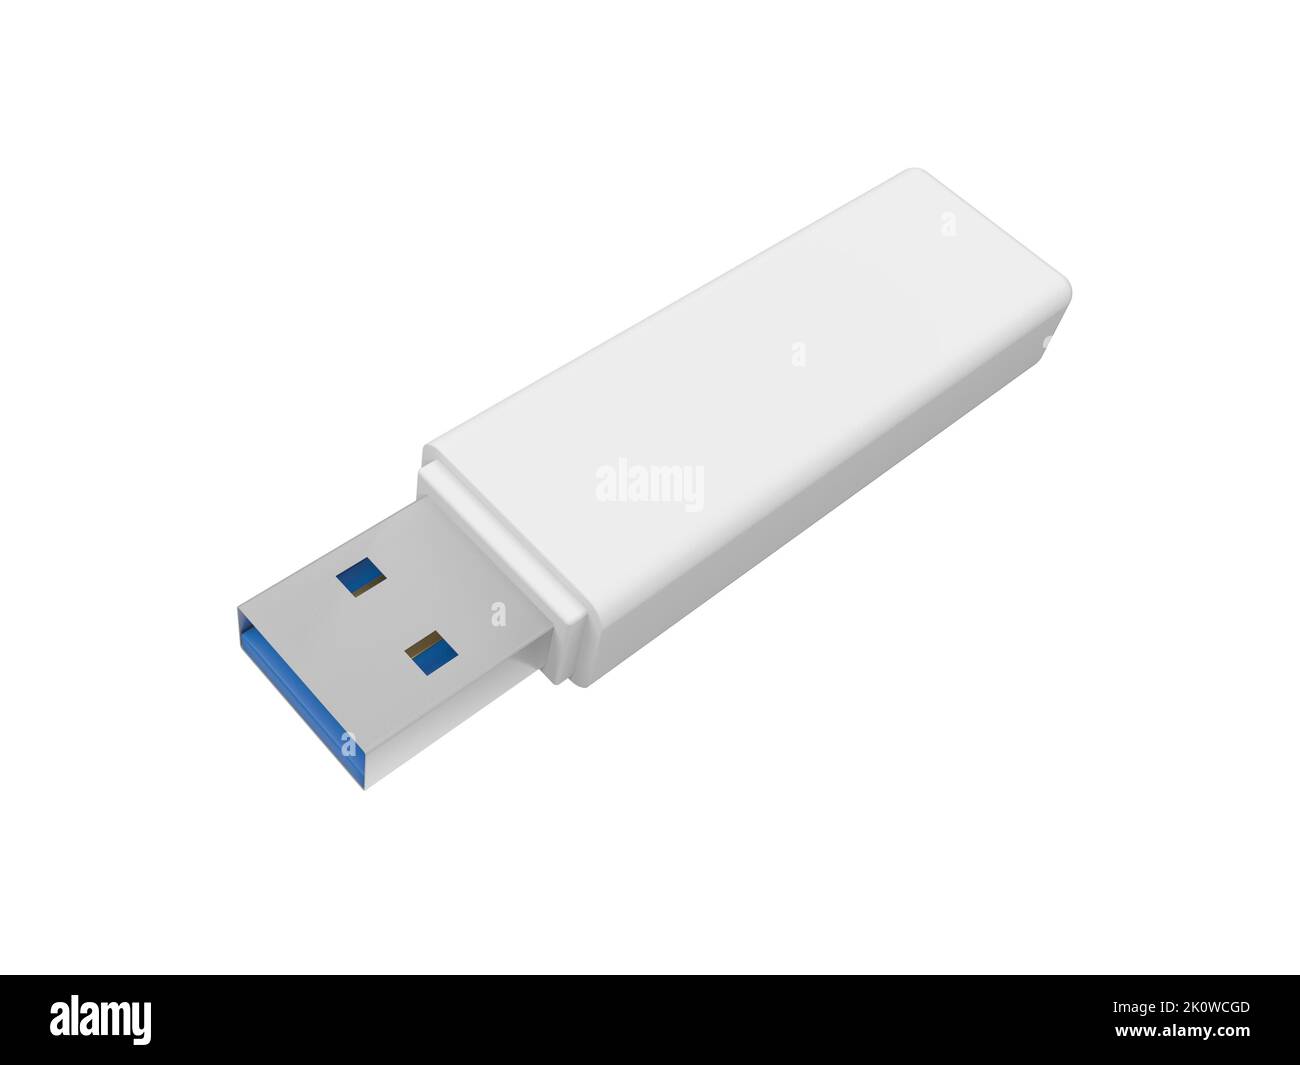 USB flash drive isolated on white background. Data storage device. Pen drive. Pendrive. 3d illustration. Stock Photo